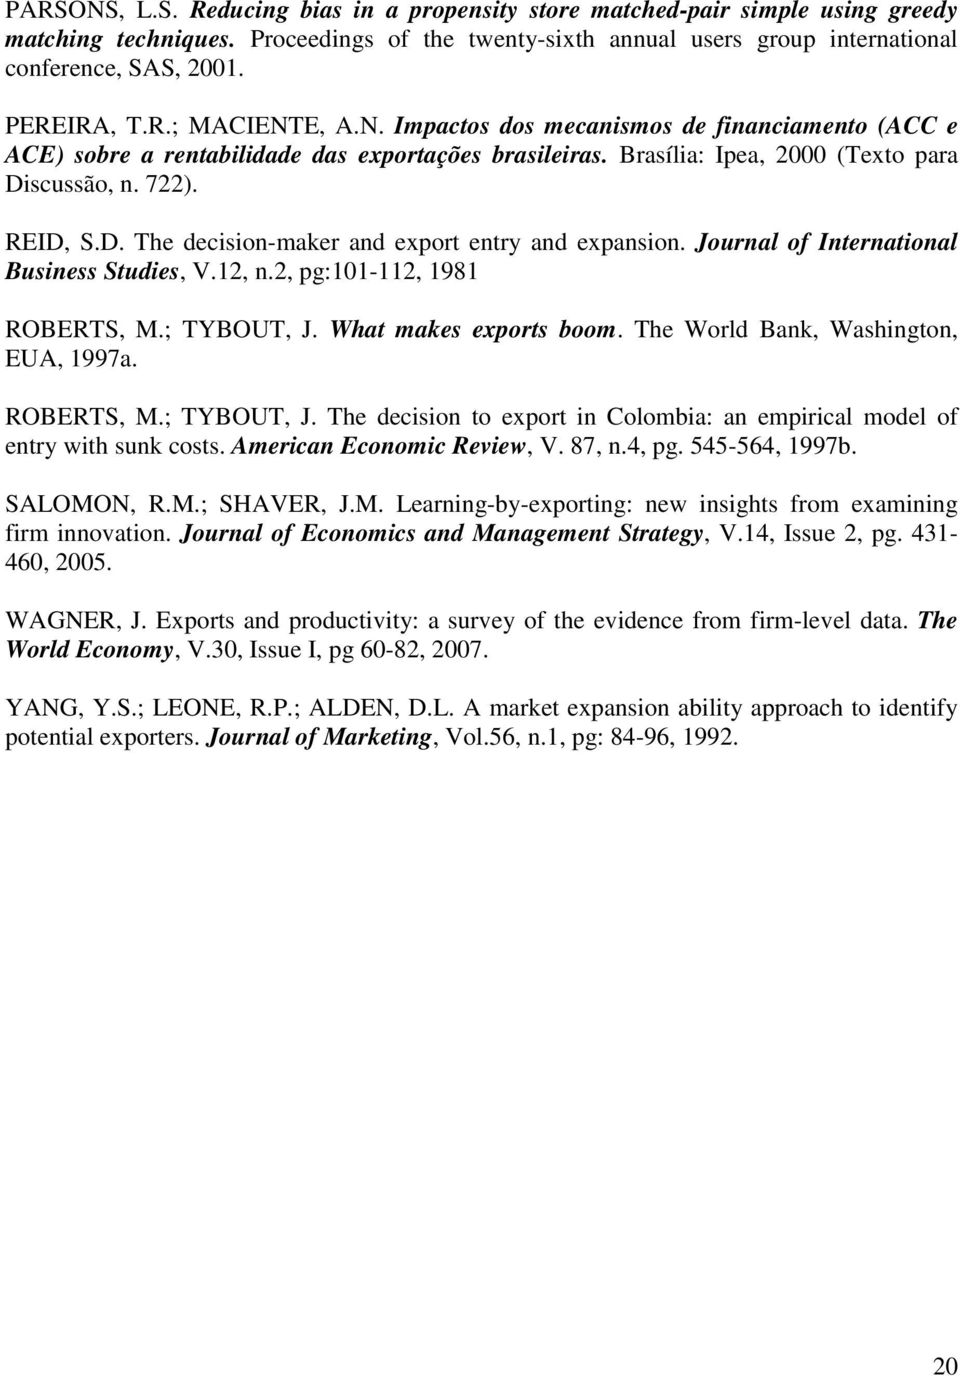 scussão, n. 722). REID, S.D. The decision-maker and export entry and expansion. Journal of International Business Studies, V.12, n.2, pg:101-112, 1981 ROBERTS, M.; TYBOUT, J. What makes exports boom.